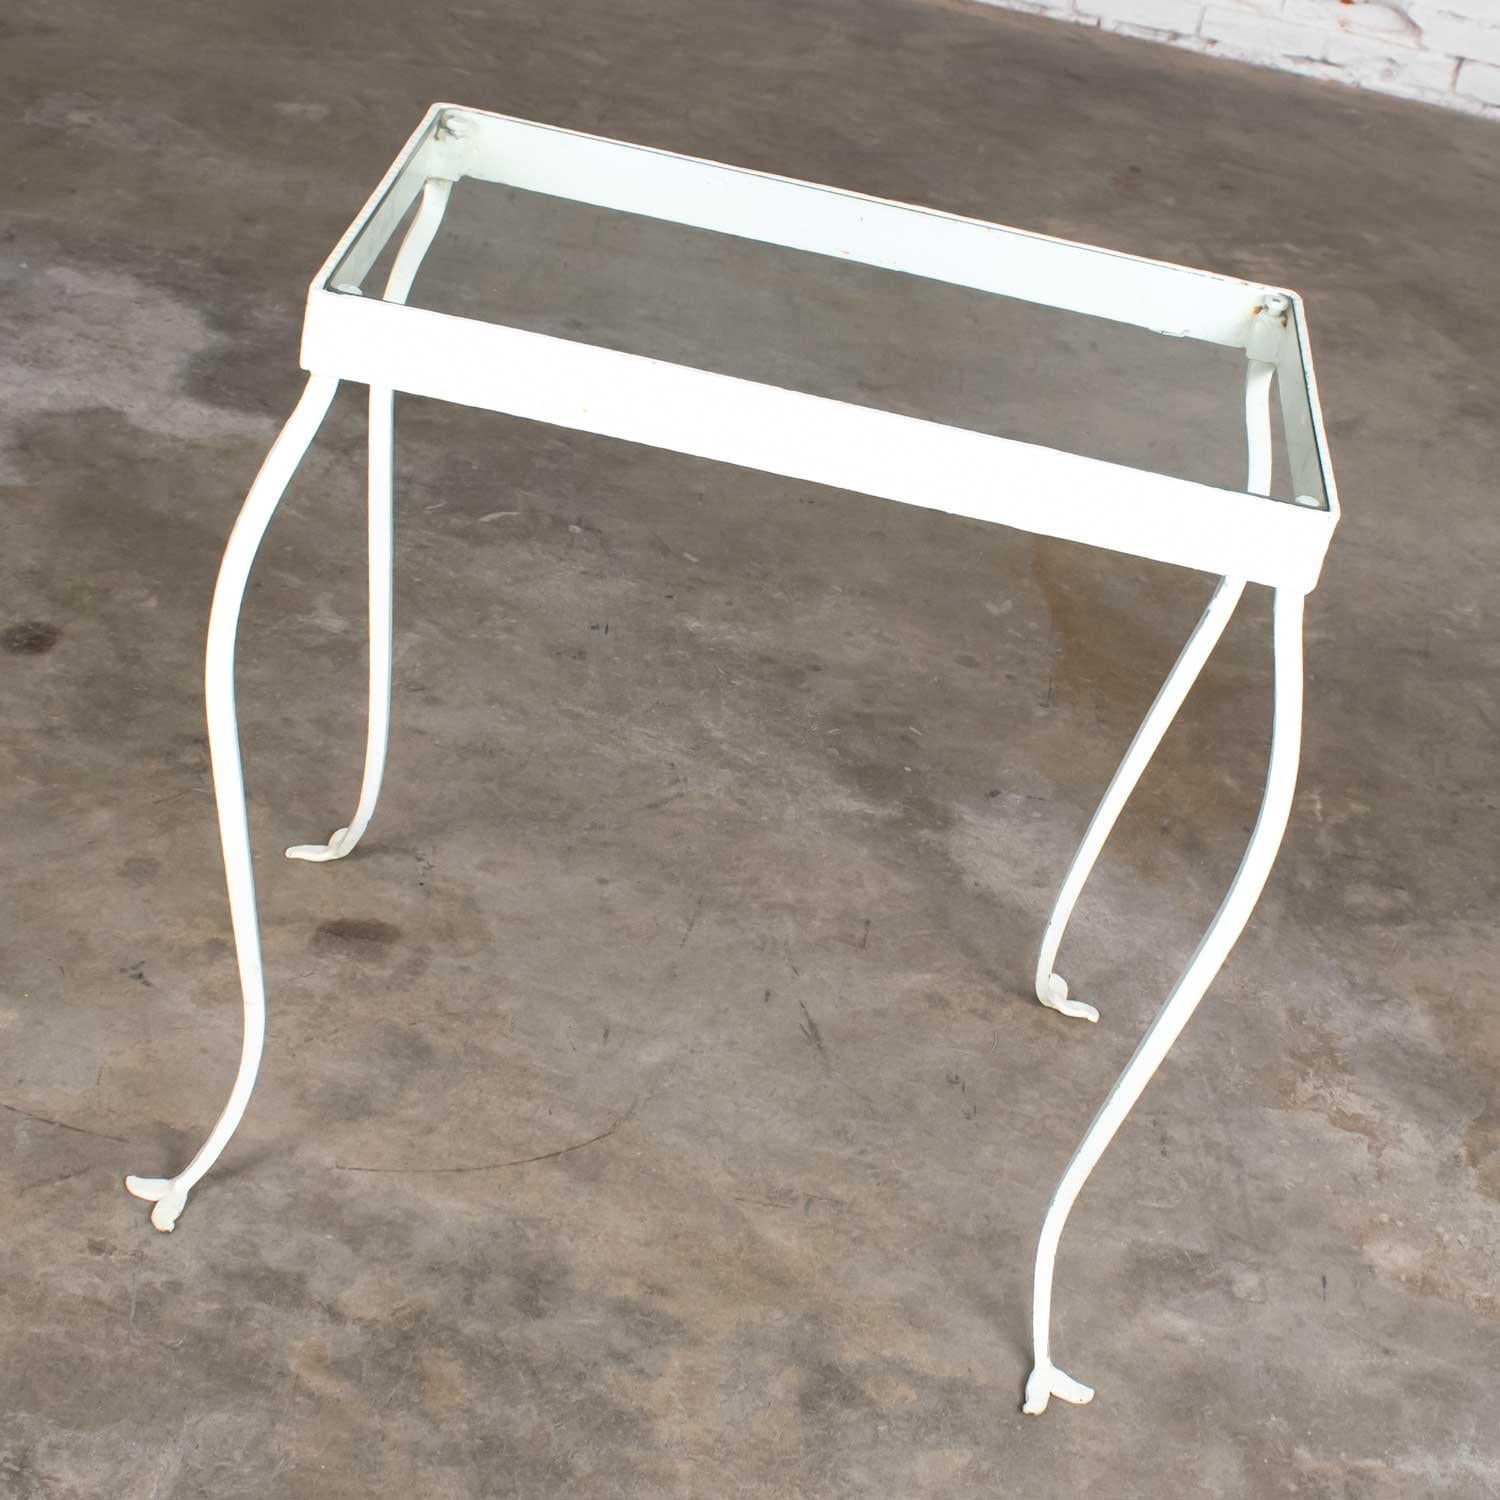 Classic handwrought iron rectangle side table with glass top. Hand painted white with bent wrought iron legs. Beautiful vintage condition. Please see photos, circa early to mid-20th century.

Simply beautiful is how we describe this hand wrought